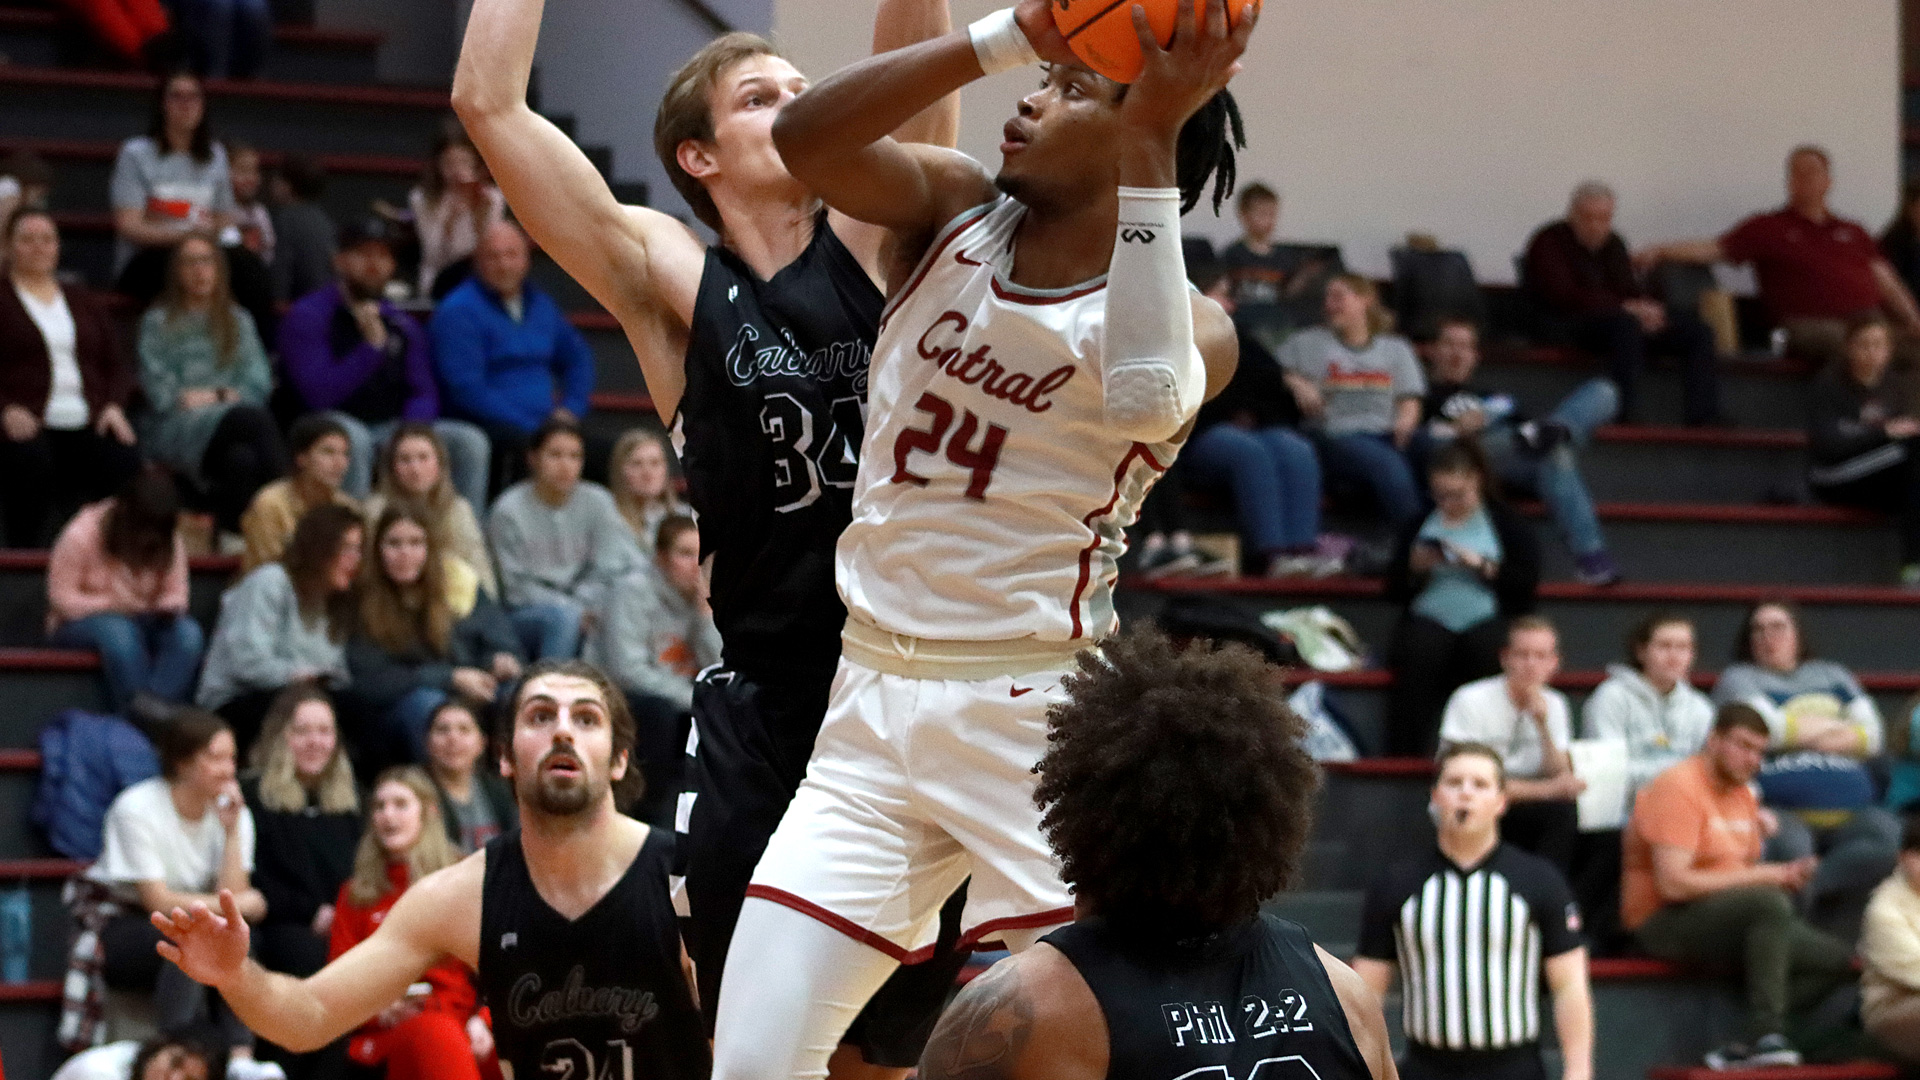 CCCB sophomore Quincy James, Jr., scored a career-high 27 points in the Saints' 92-85 victory over Calvary University.